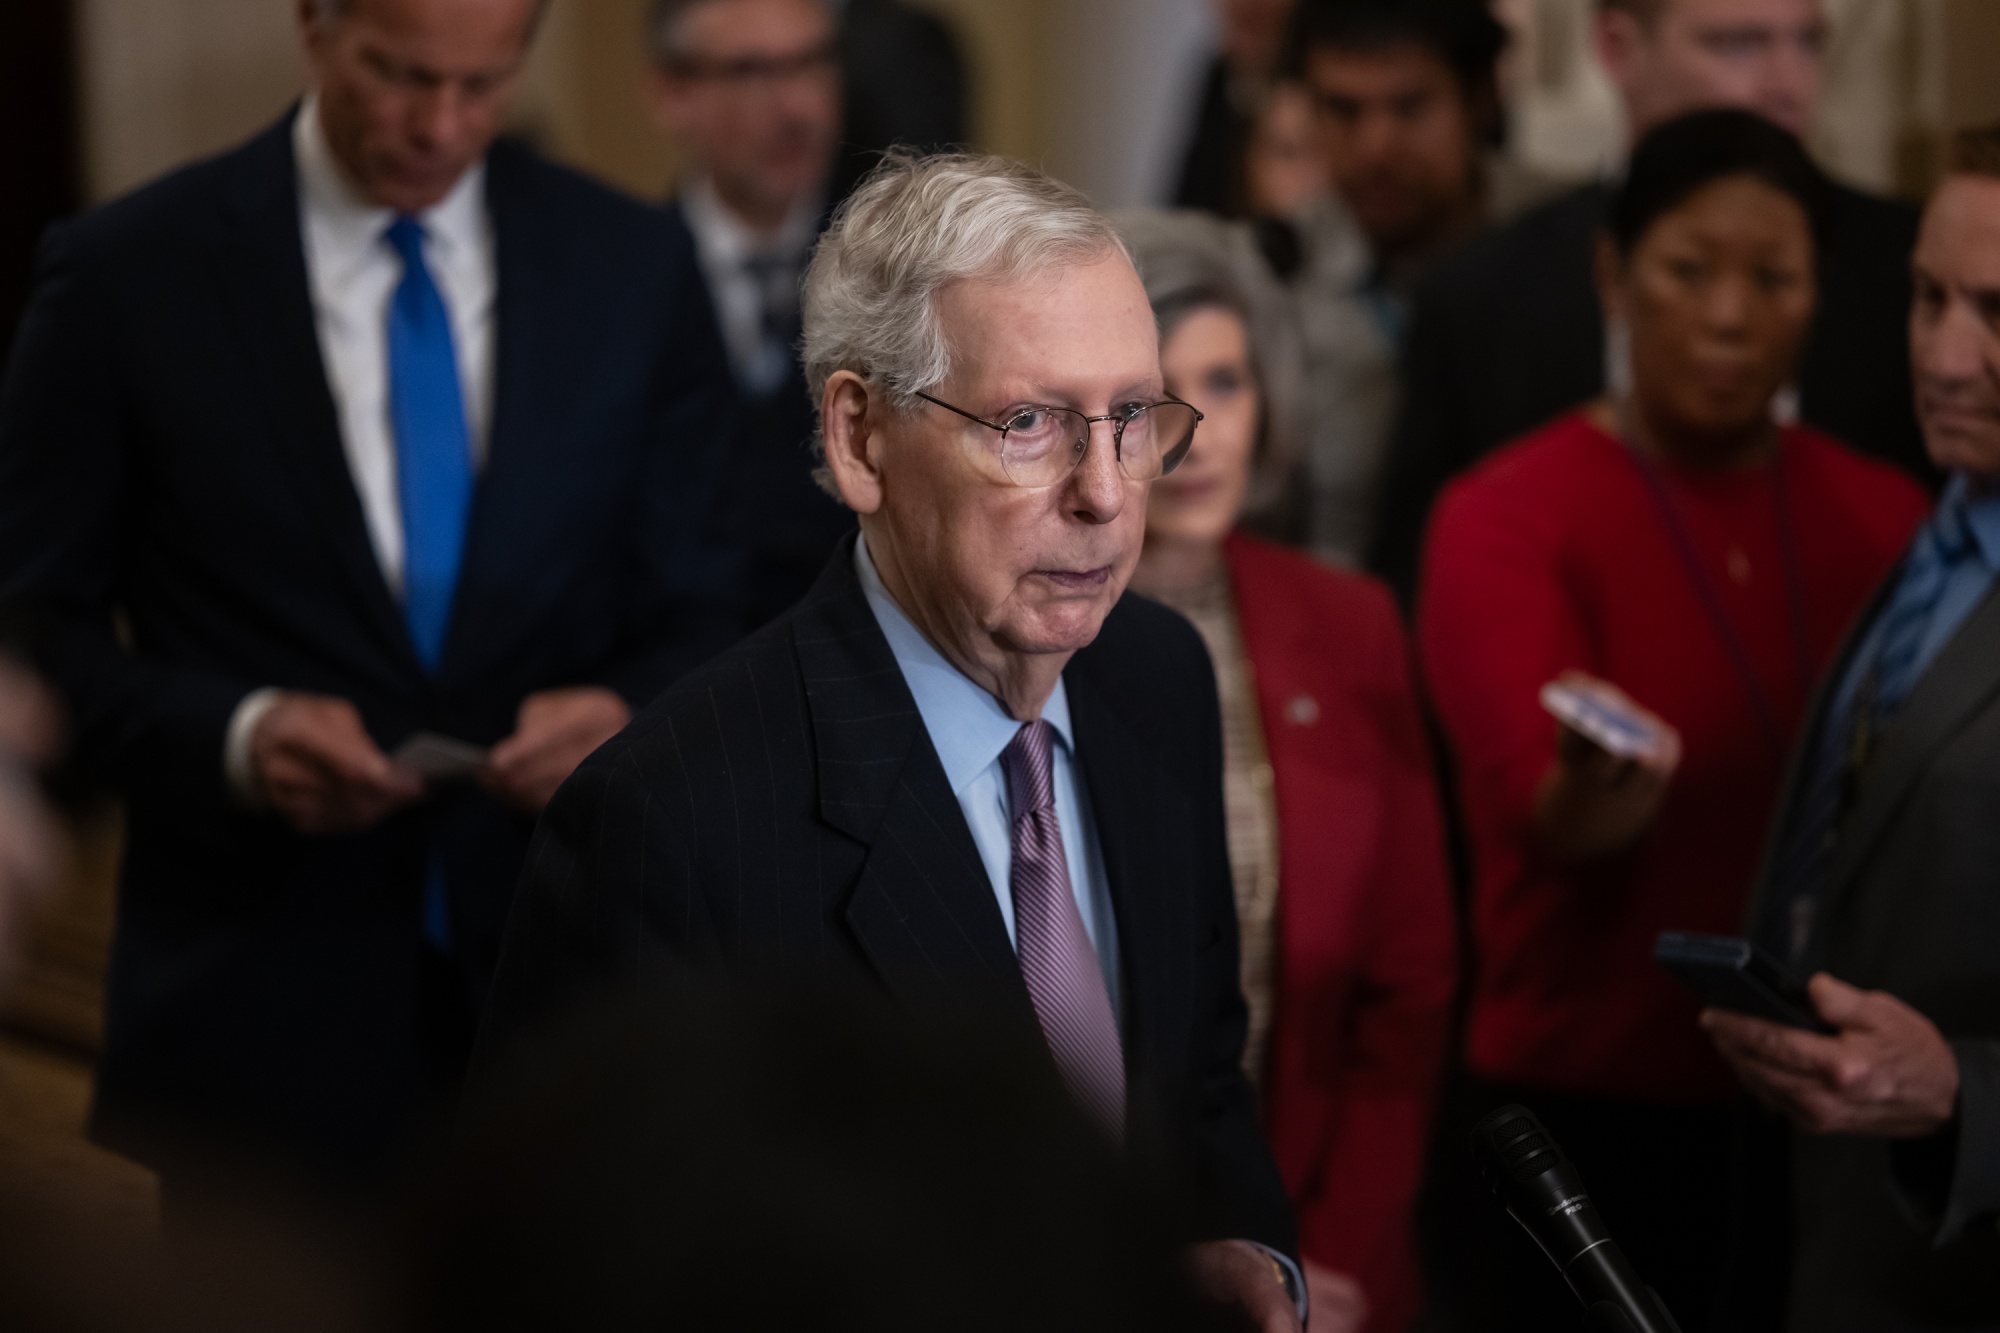 McConnell Steps Down From Leadership in Bow to Trump - Bloomberg